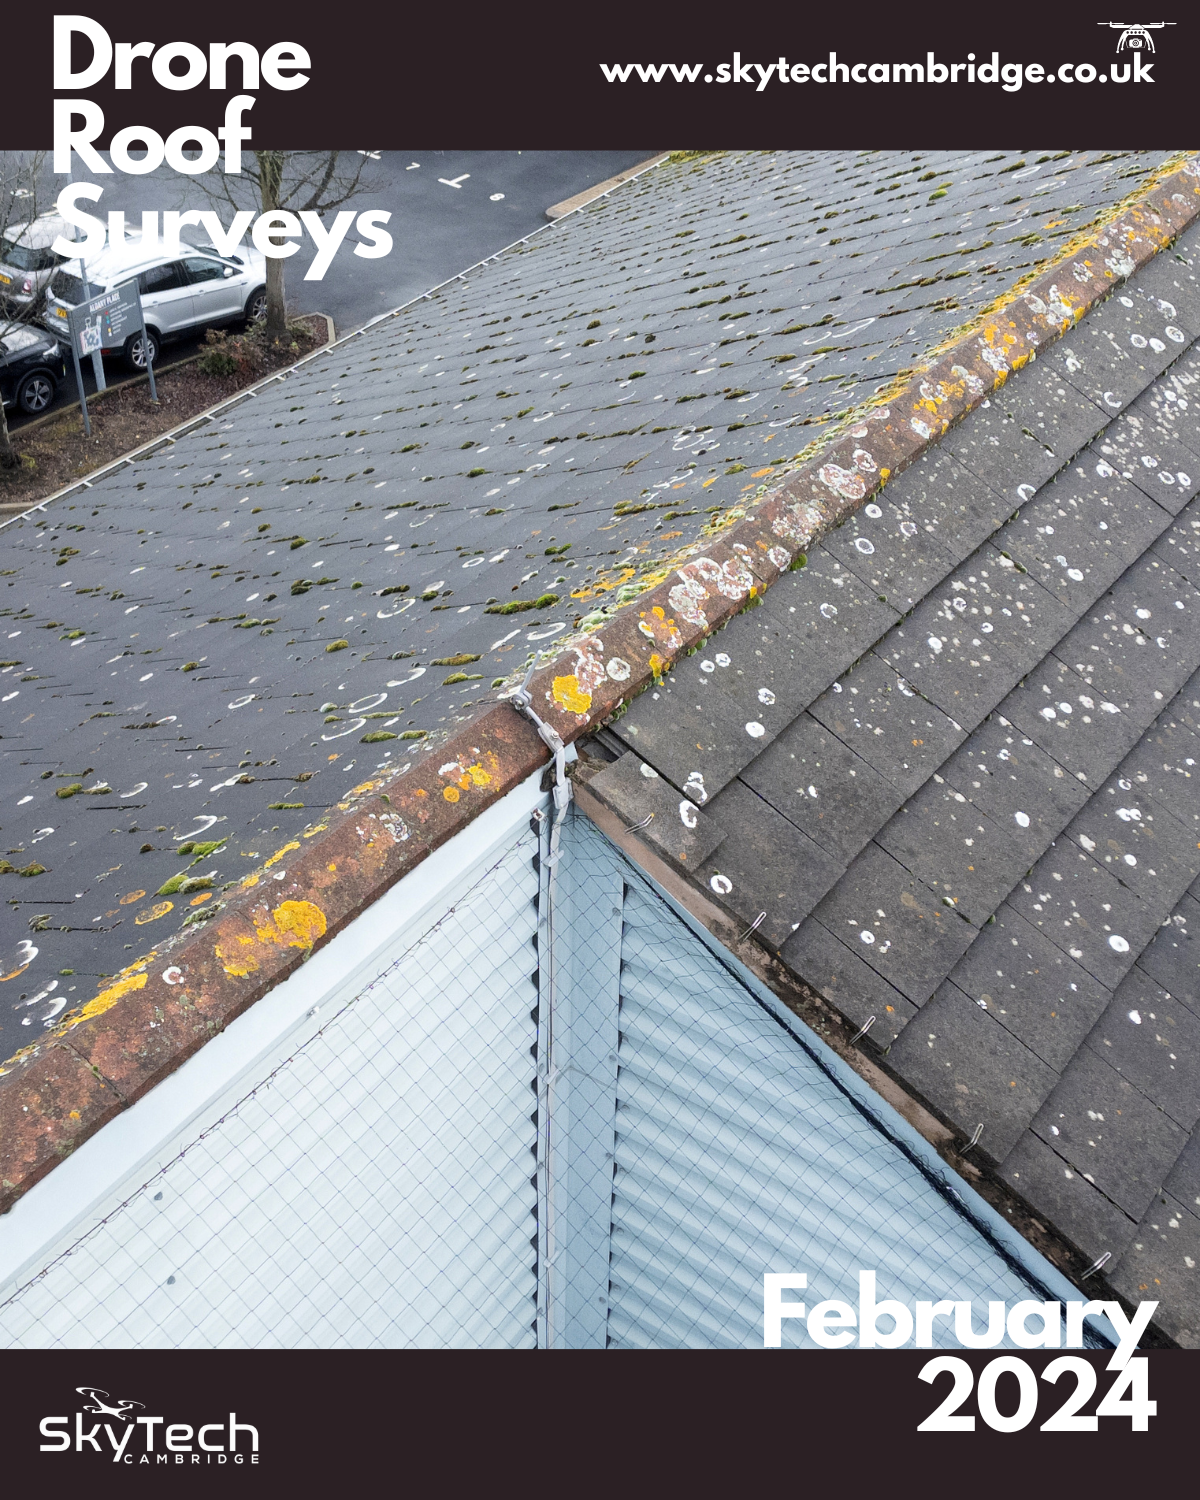 Drone roof survey - slipped roof tile